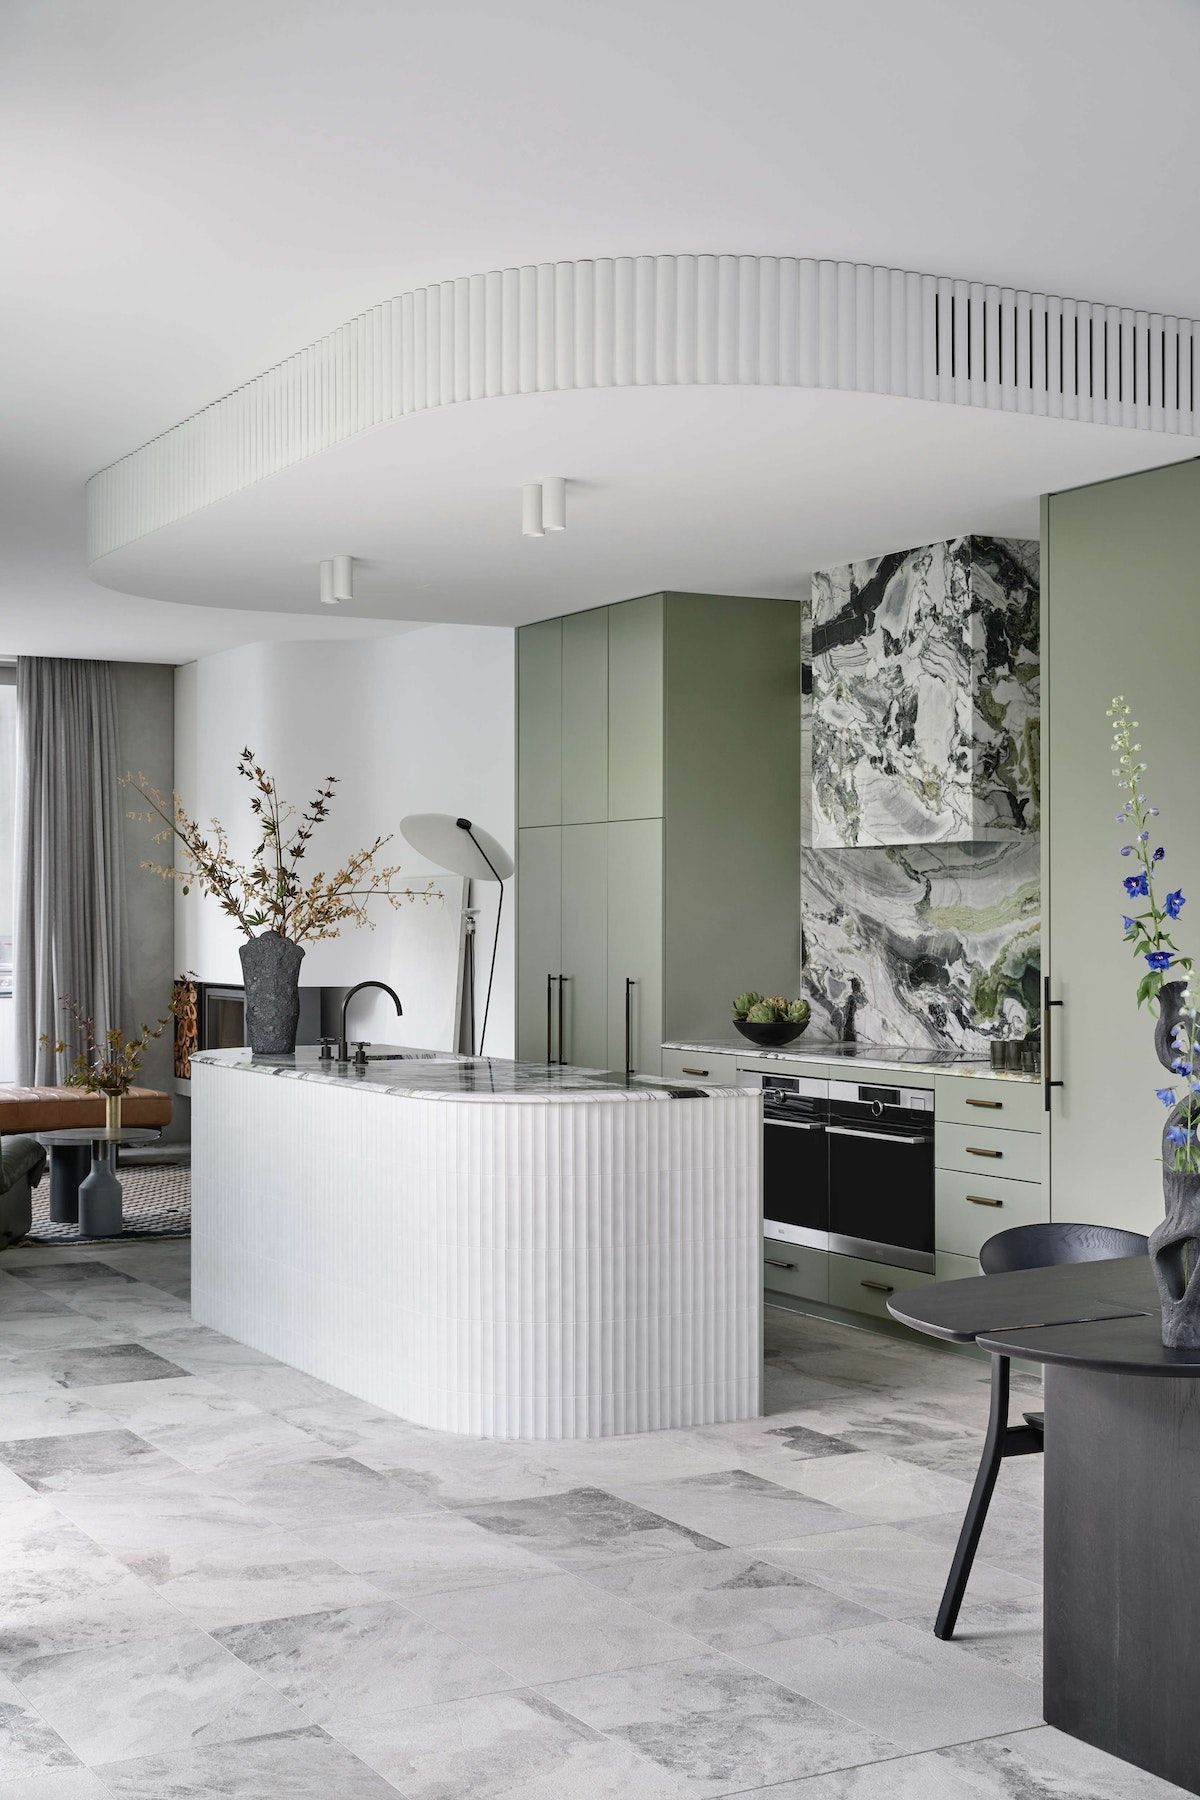 Glen Iris House by Luke Fry Architecture and Interior Design showing the green kitchen joinery and island bench